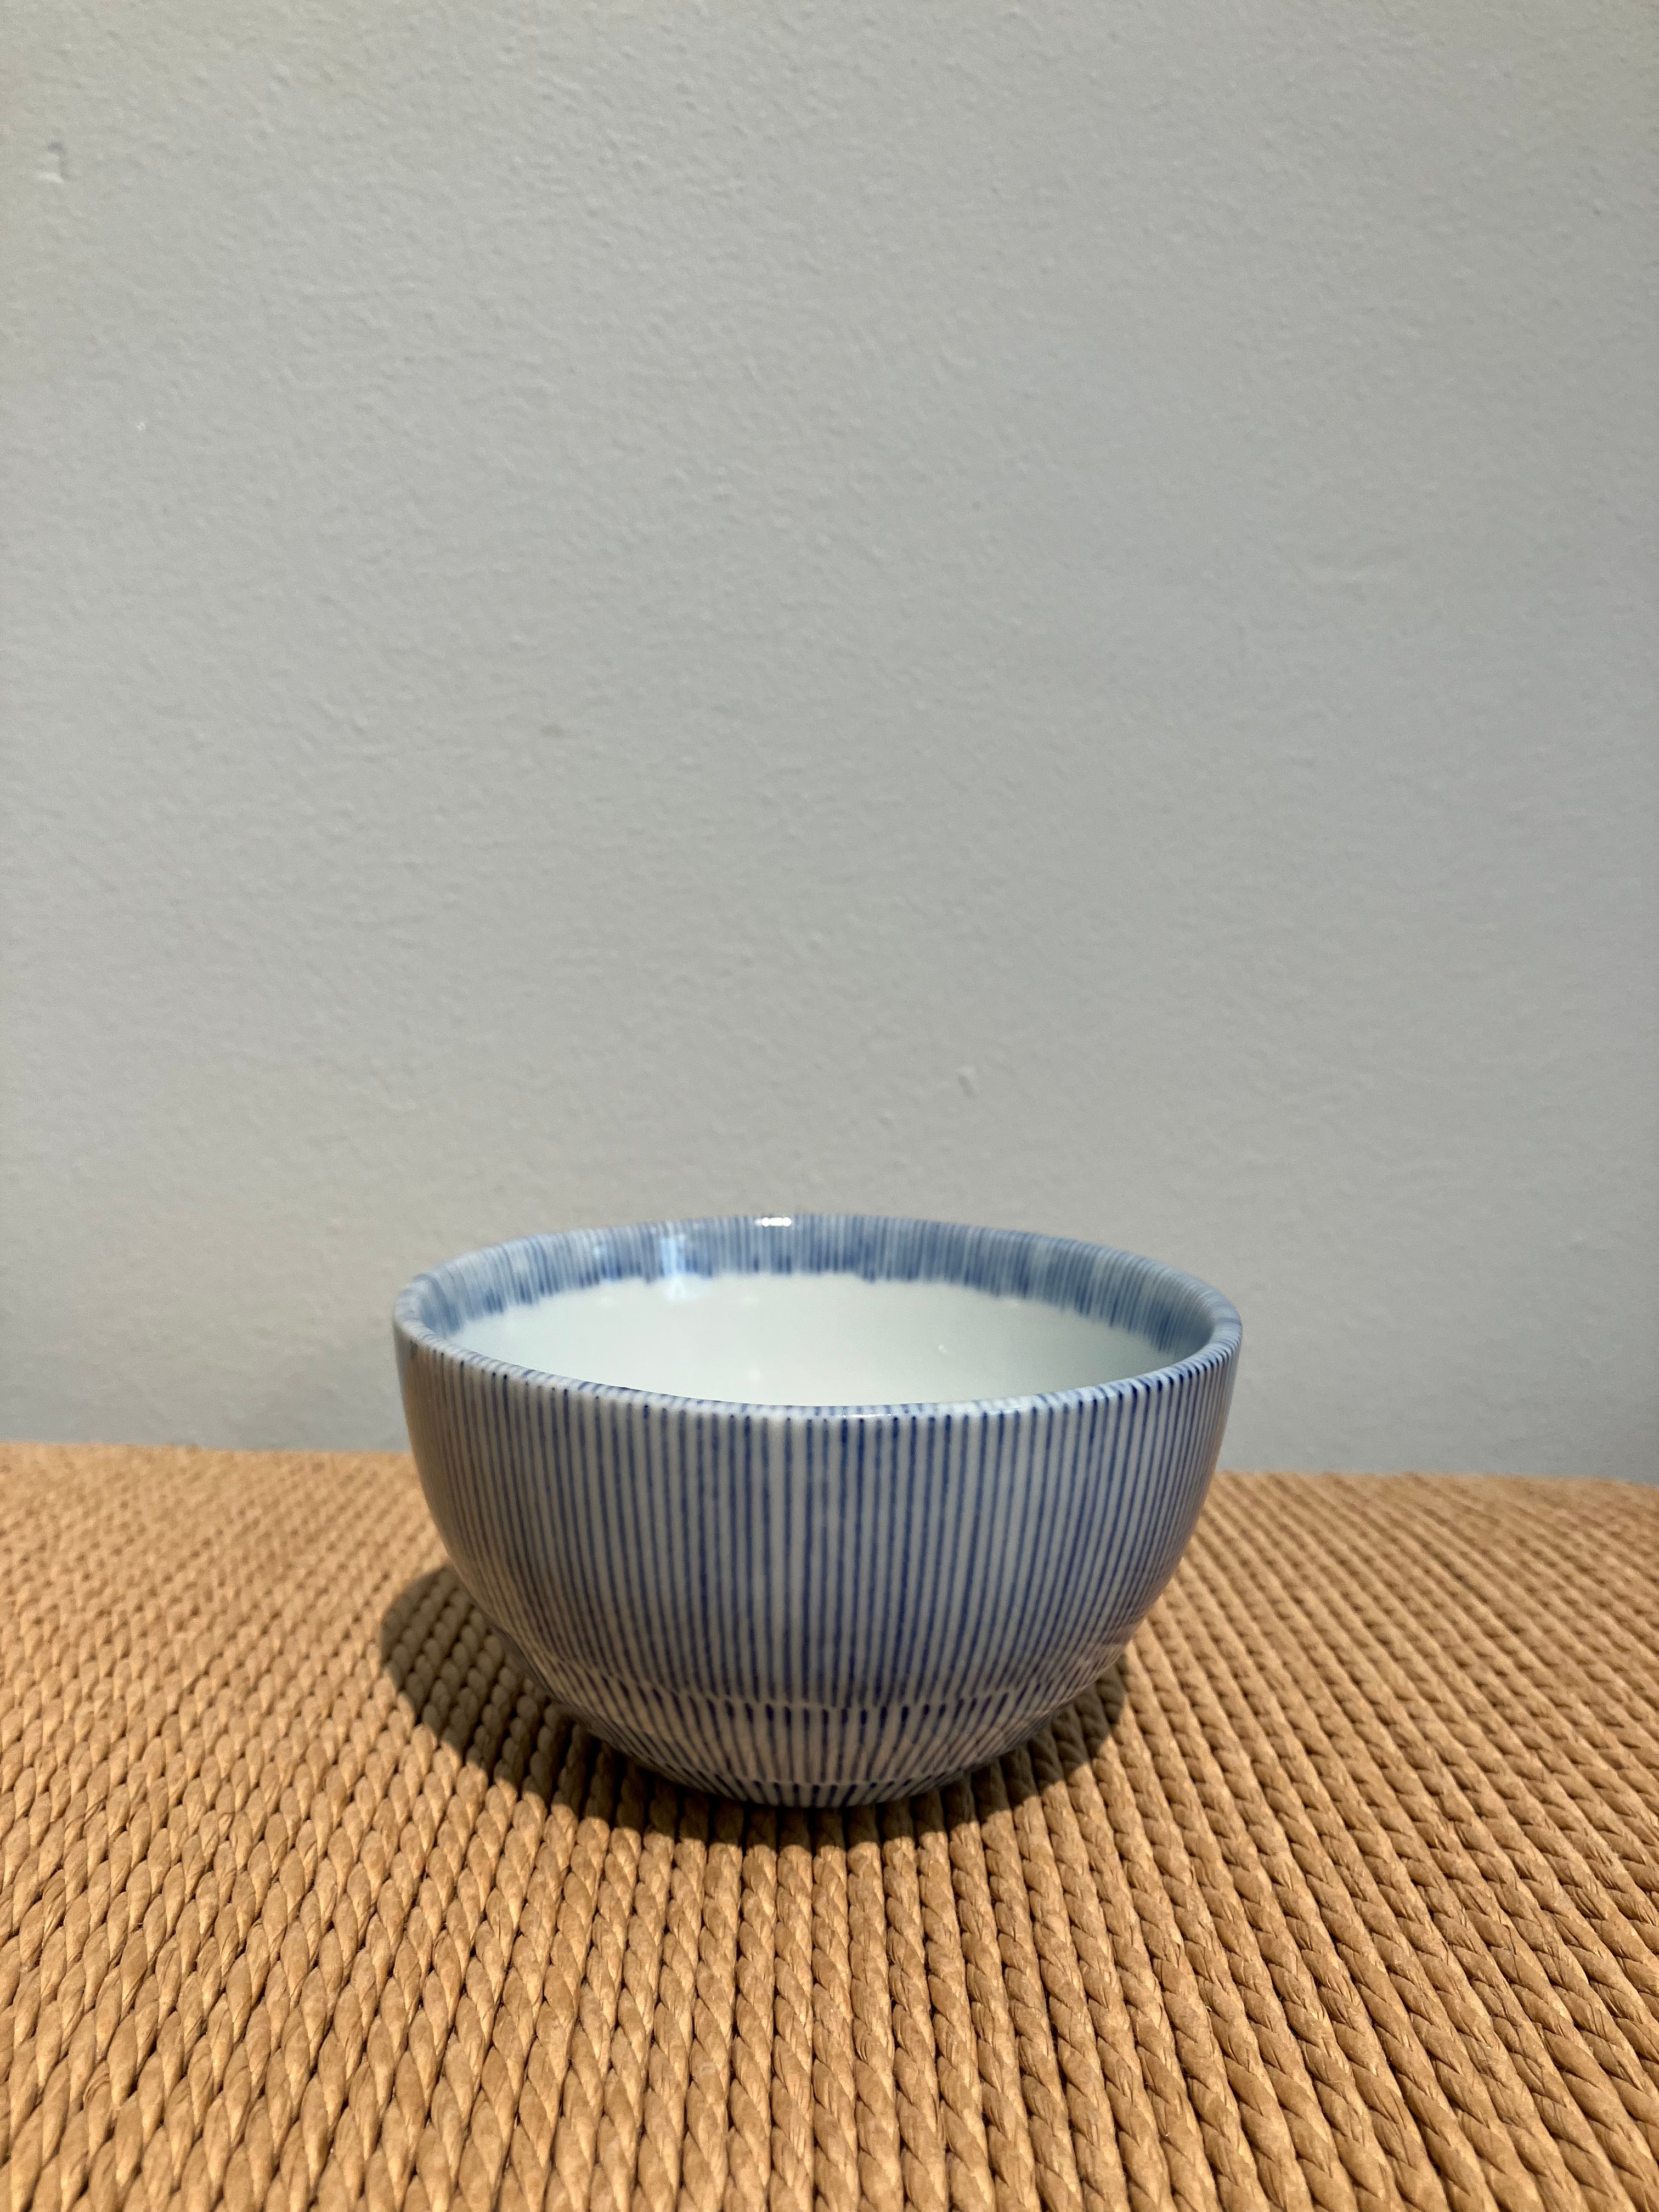 Small bowl with white glaze and blue thin stripes